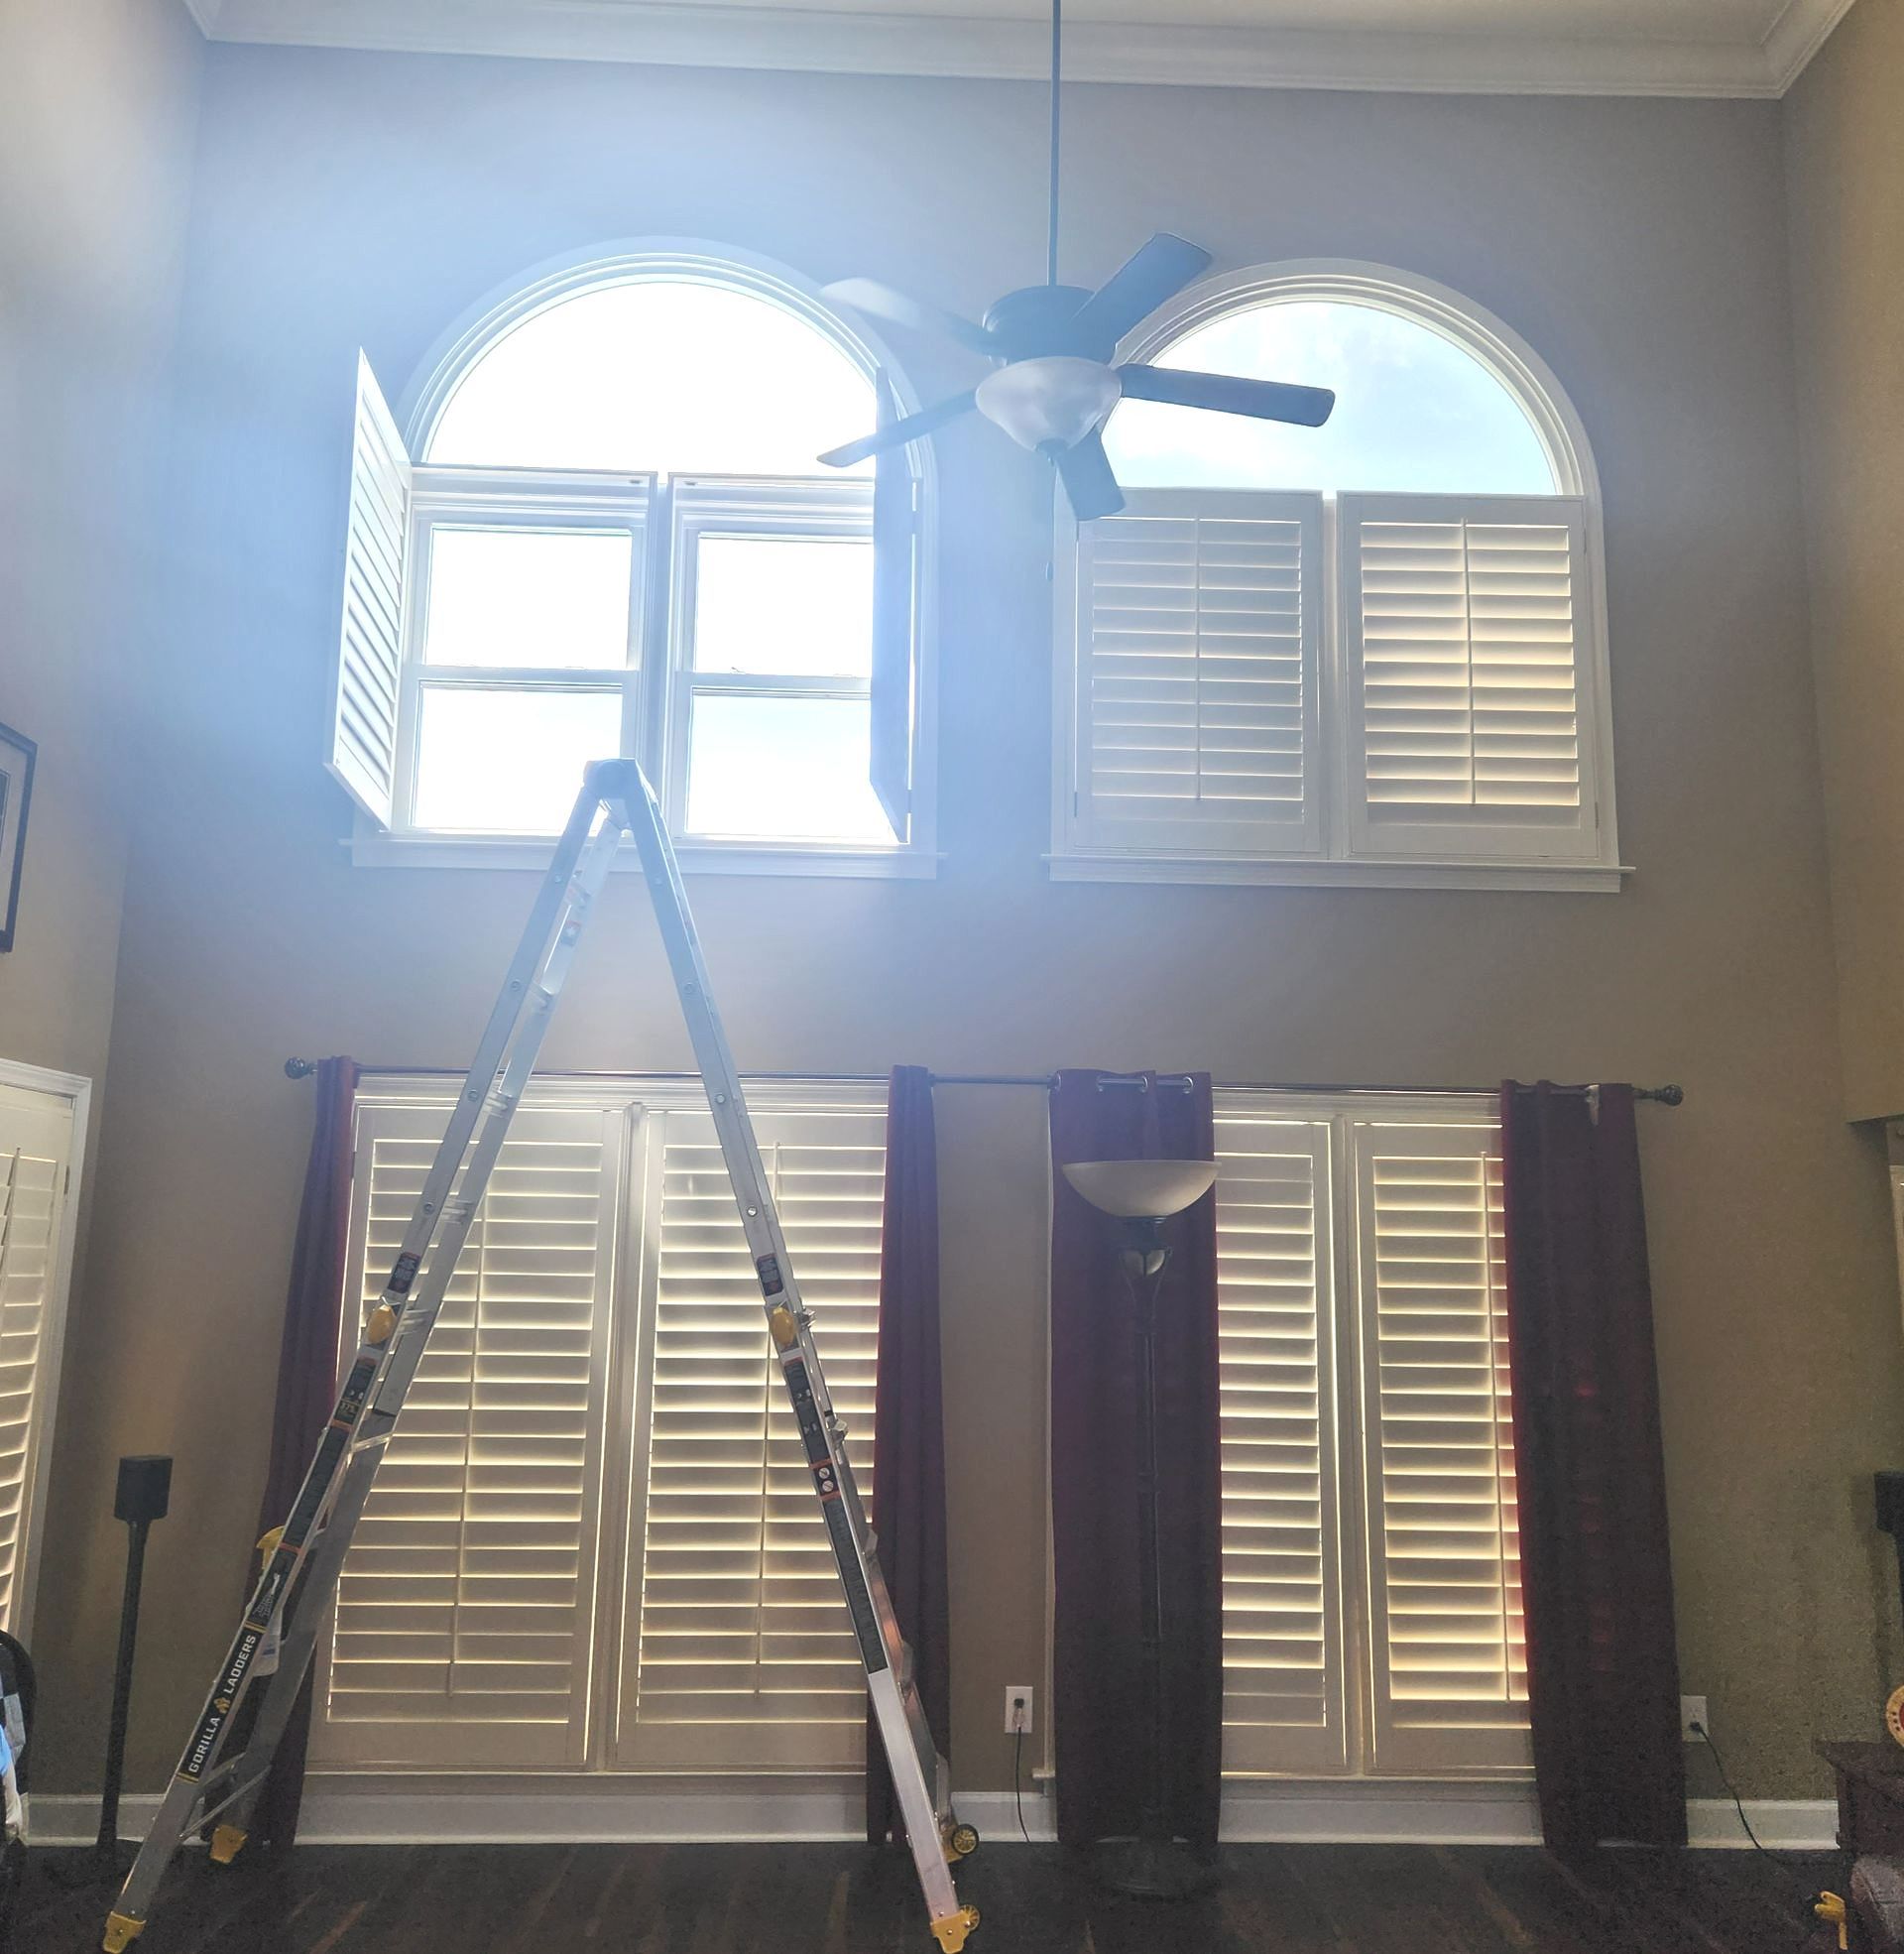 window tinting - Heat Gain through the glass would not allow for an even climate until SPF window tint was installed stopping heat transfer resulting in great power savings. Montgomery AL